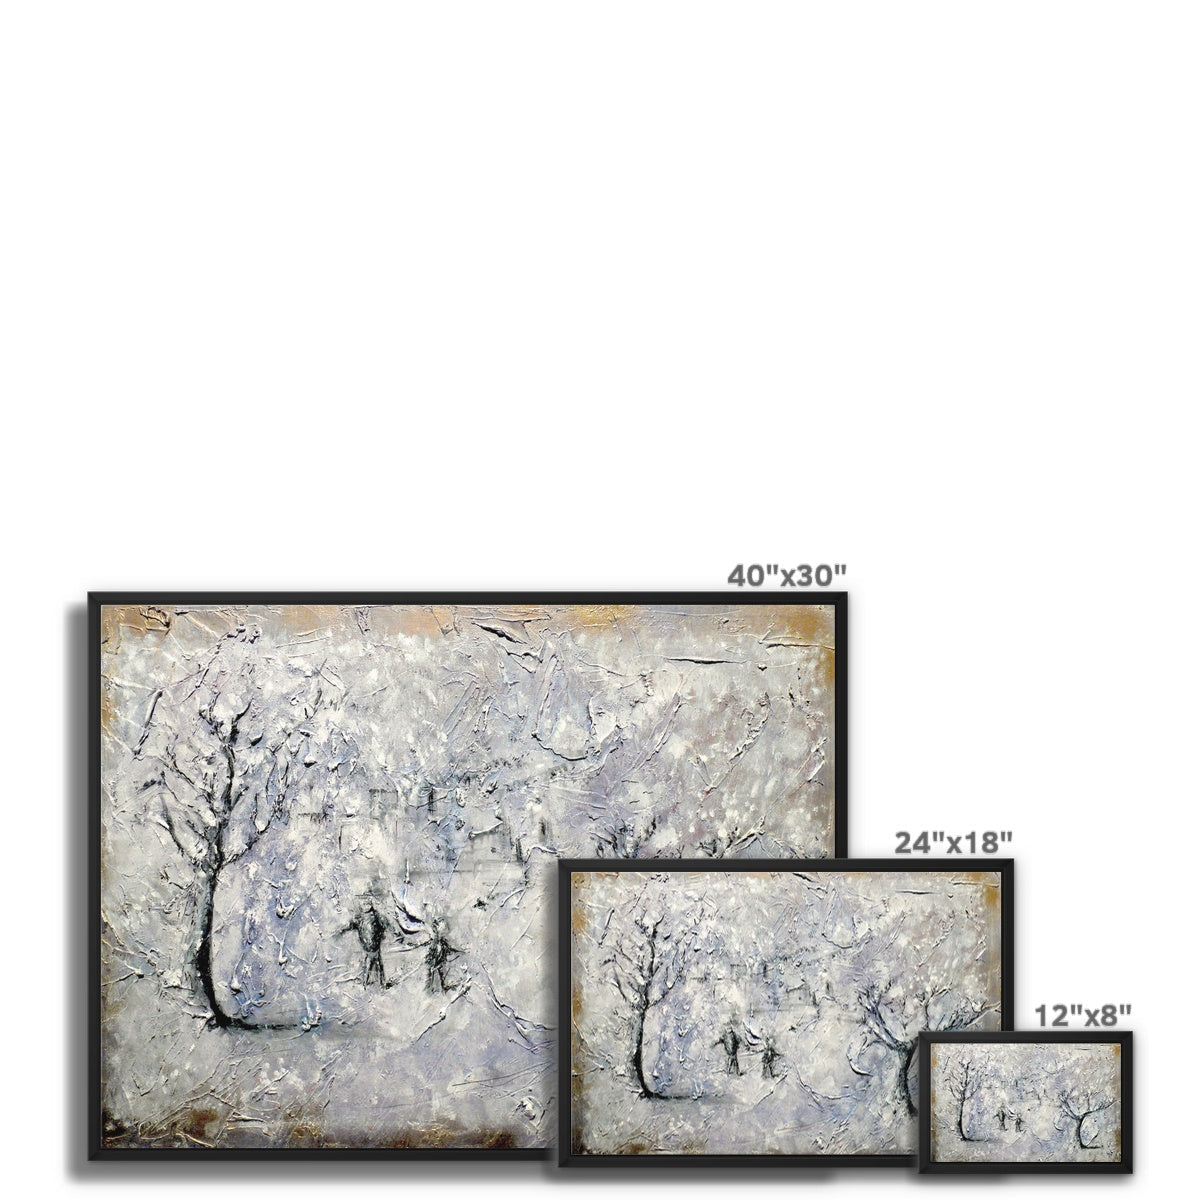 Father Daughter Snow Painting | Framed Canvas From Scotland-Floating Framed Canvas Prints-Abstract & Impressionistic Art Gallery-Paintings, Prints, Homeware, Art Gifts From Scotland By Scottish Artist Kevin Hunter